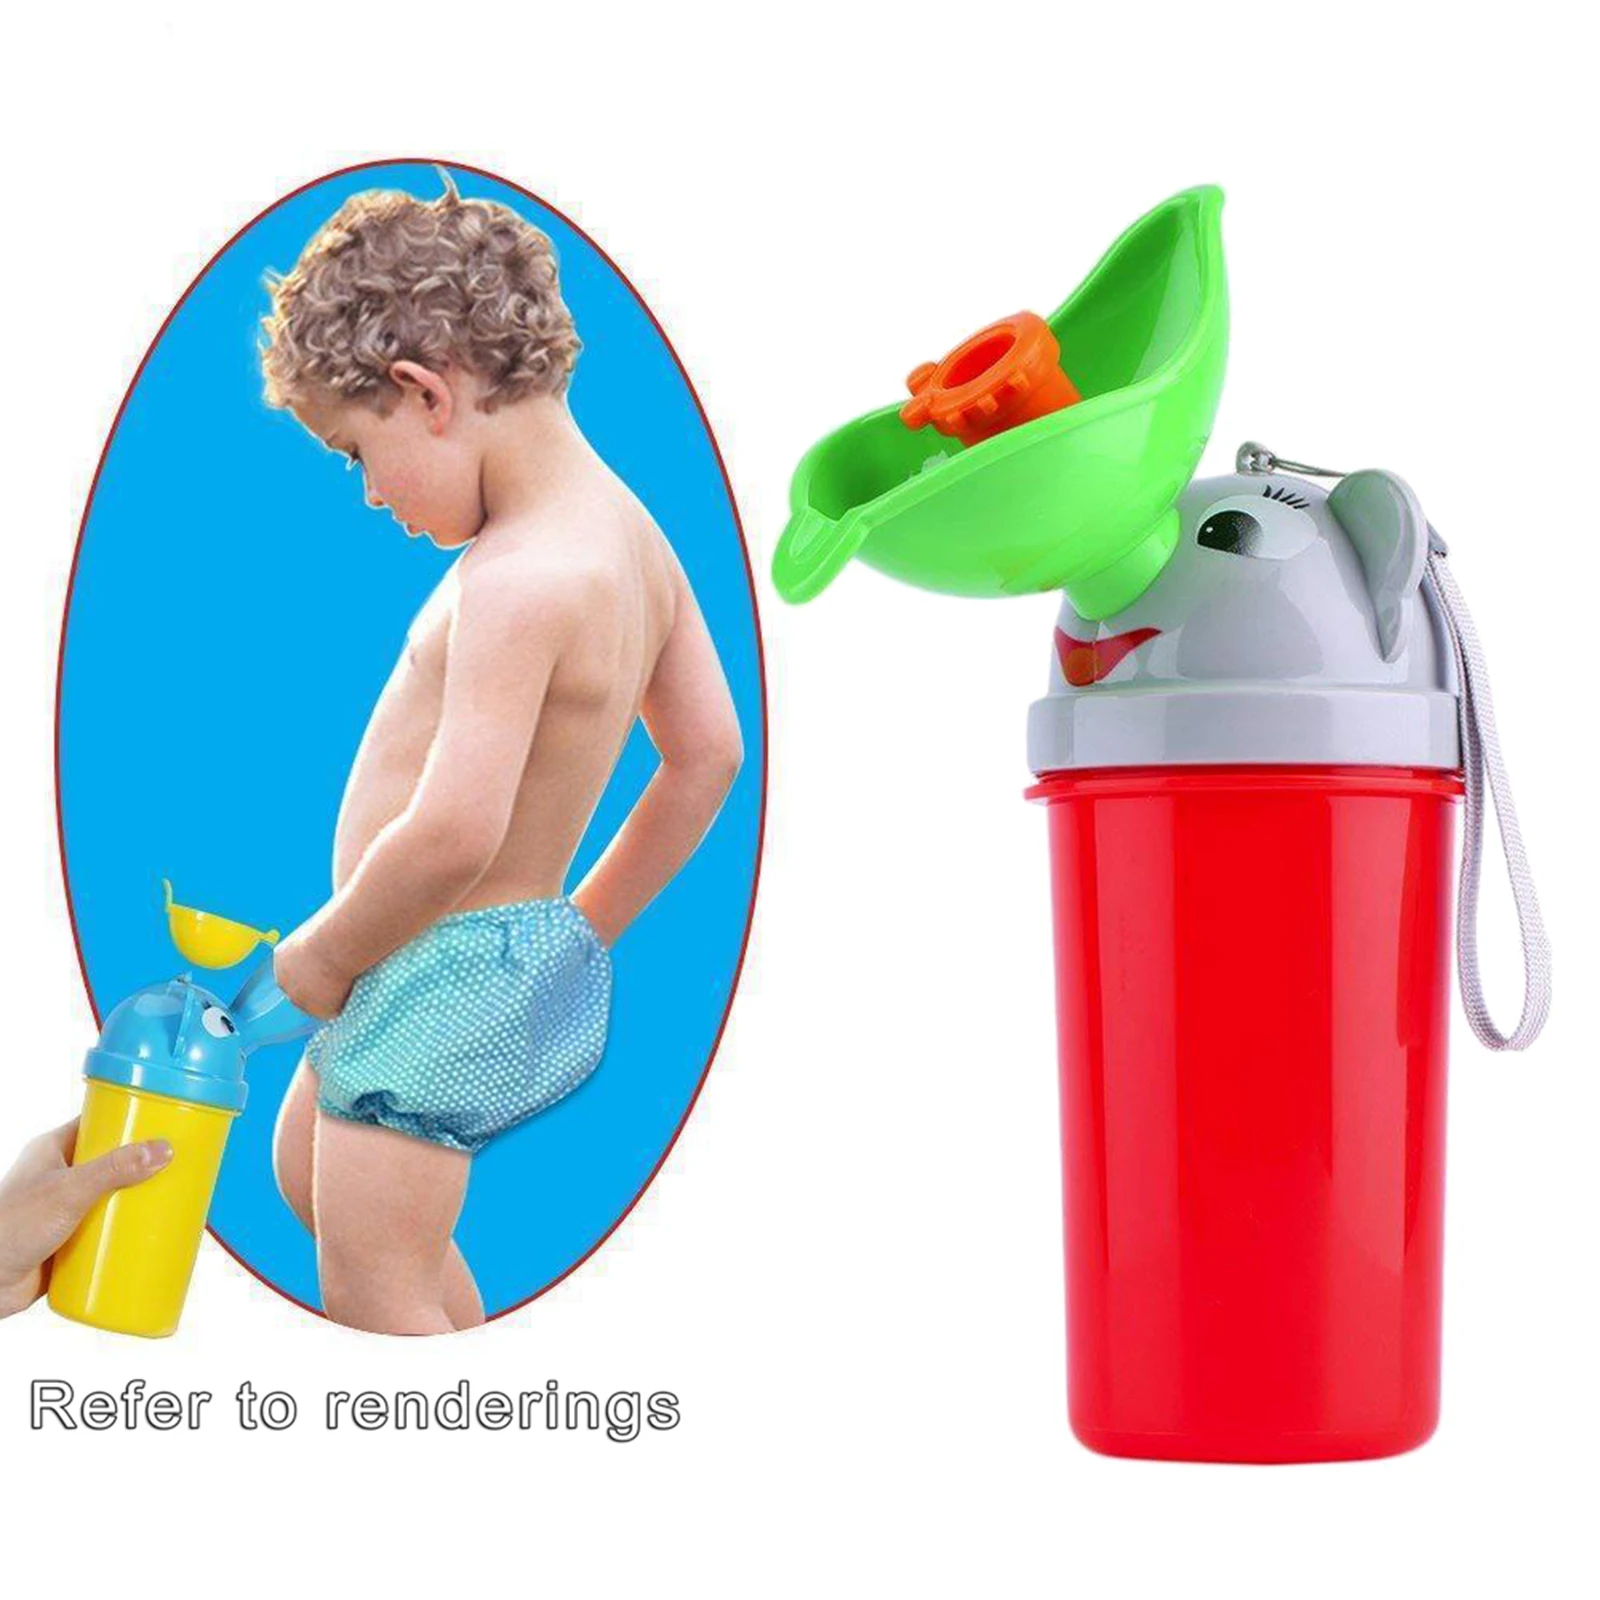 Hygiene Travel Urinal Potty Convenient Toilet Pee Bottle Cup for Kids Boys Girls Trip Camping